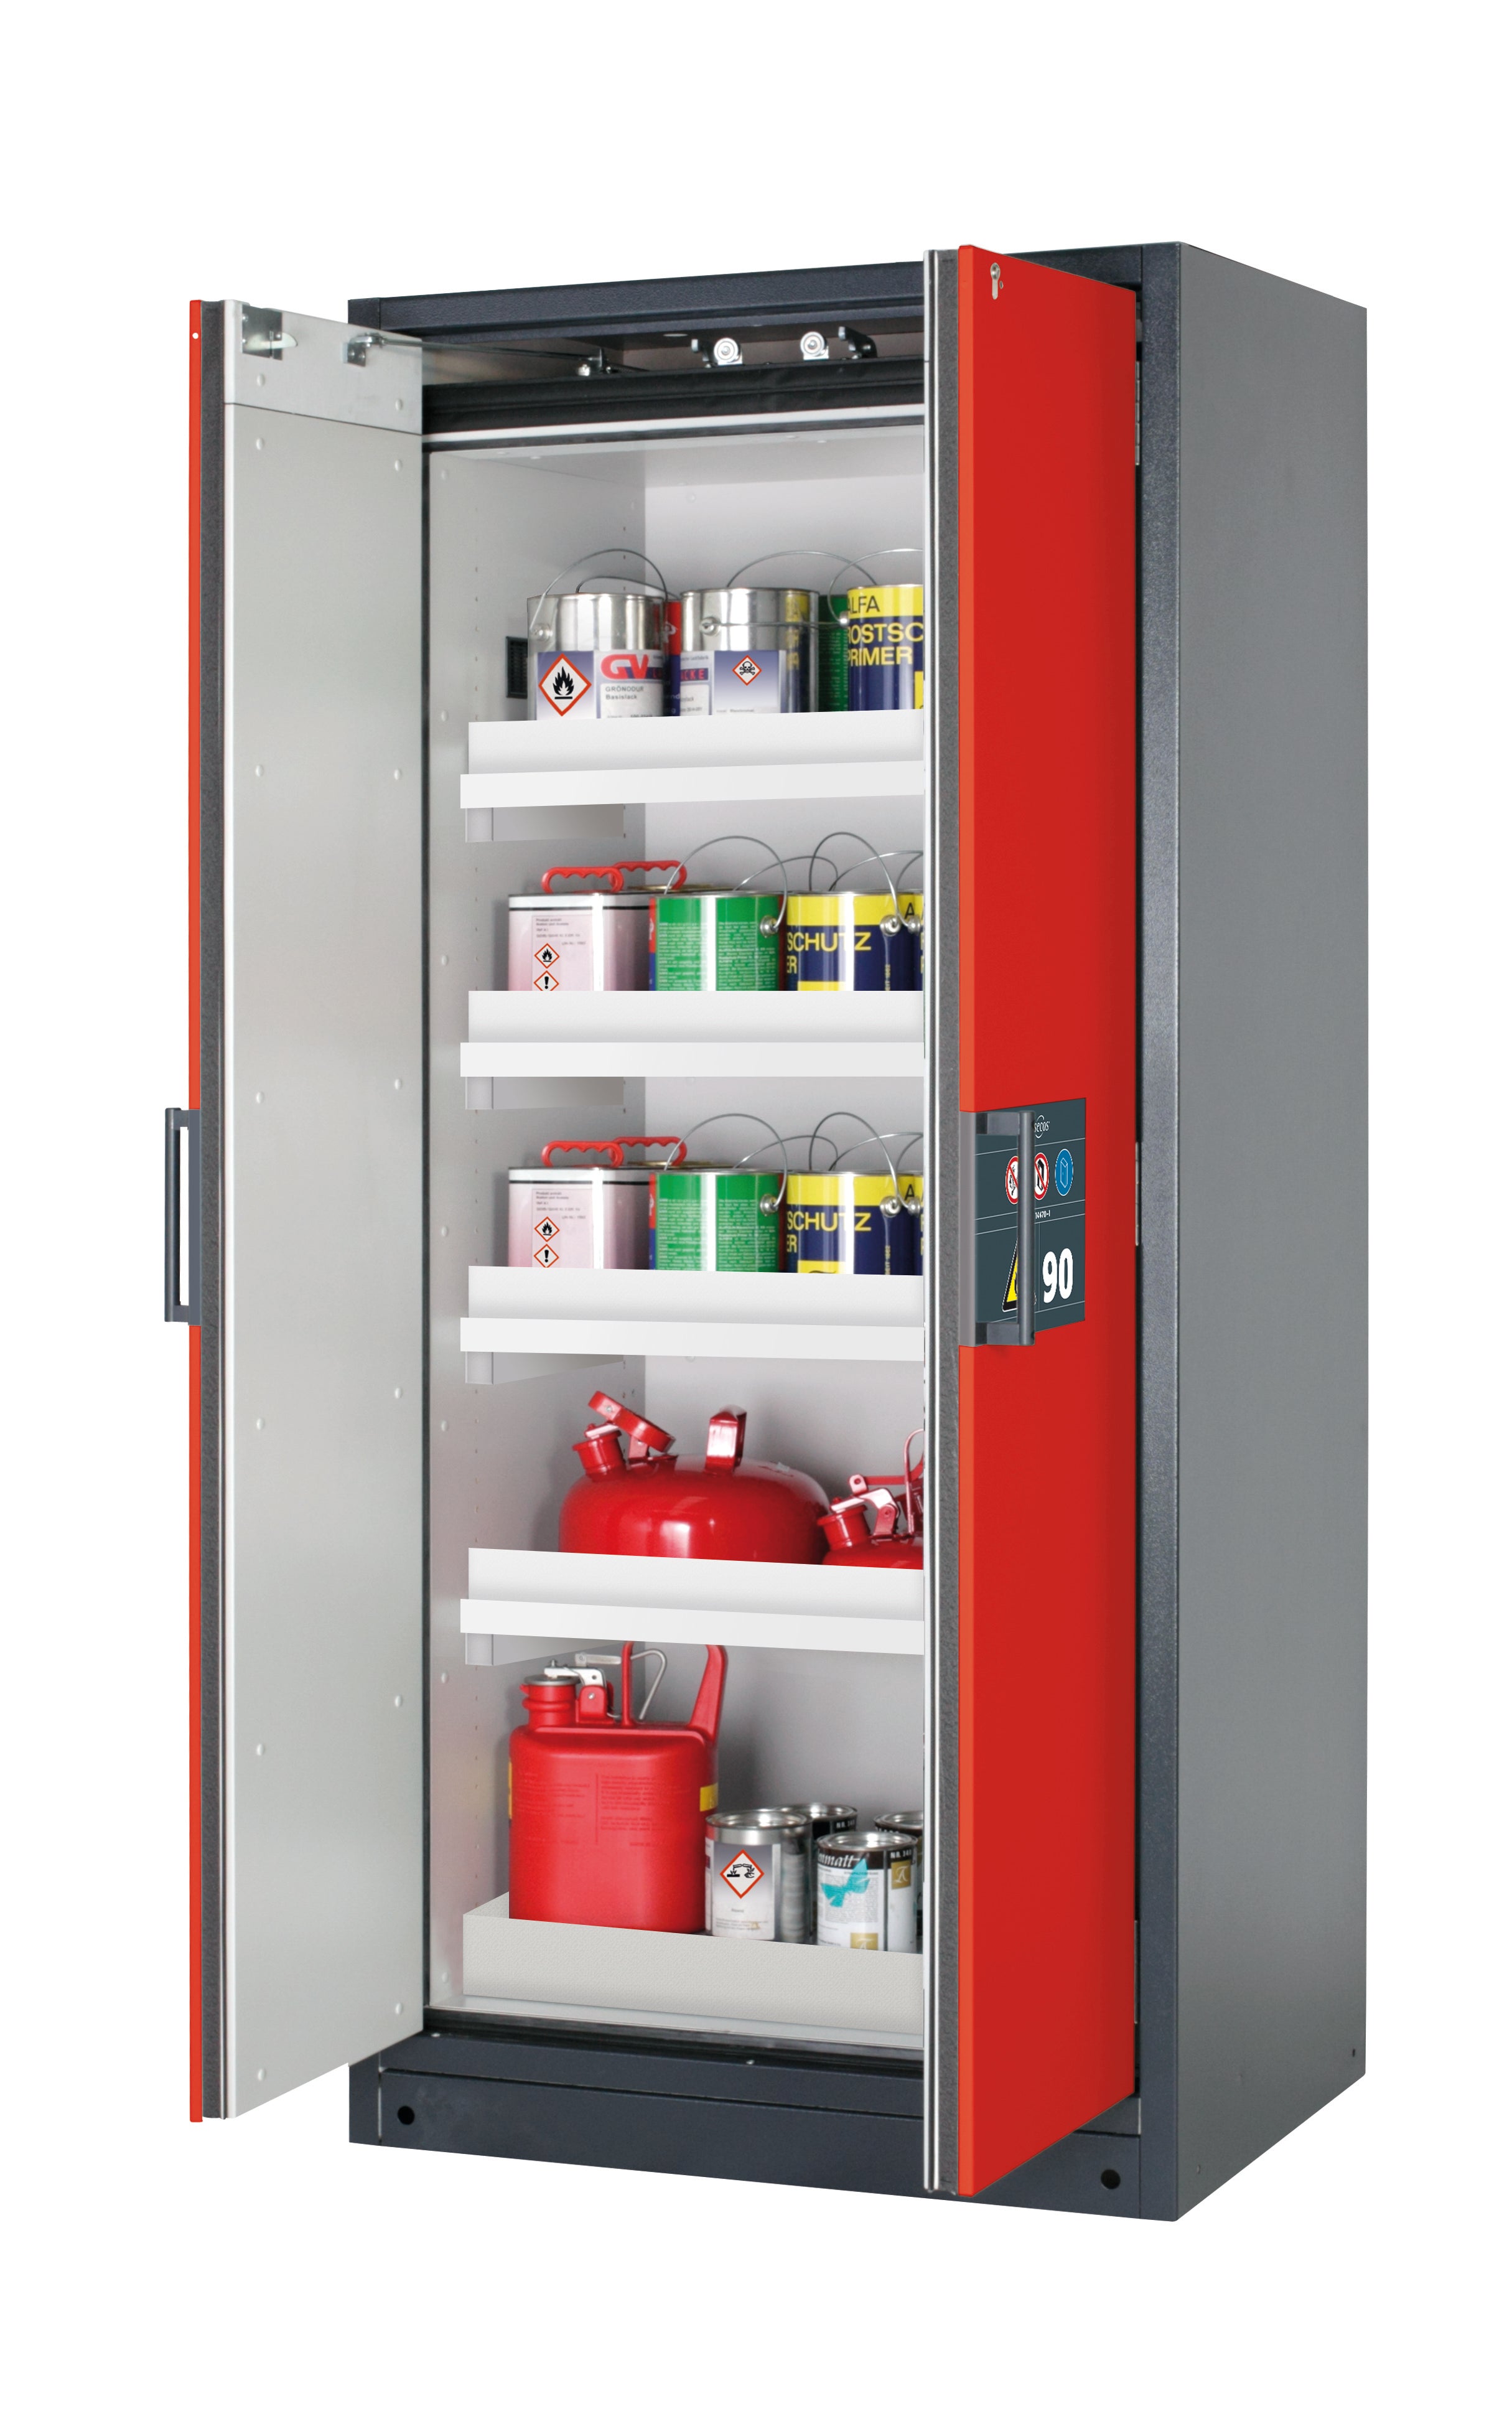 Type 90 safety storage cabinet Q-CLASSIC-90 model Q90.195.090 in traffic red RAL 3020 with 4x tray shelf (standard) (polypropylene),